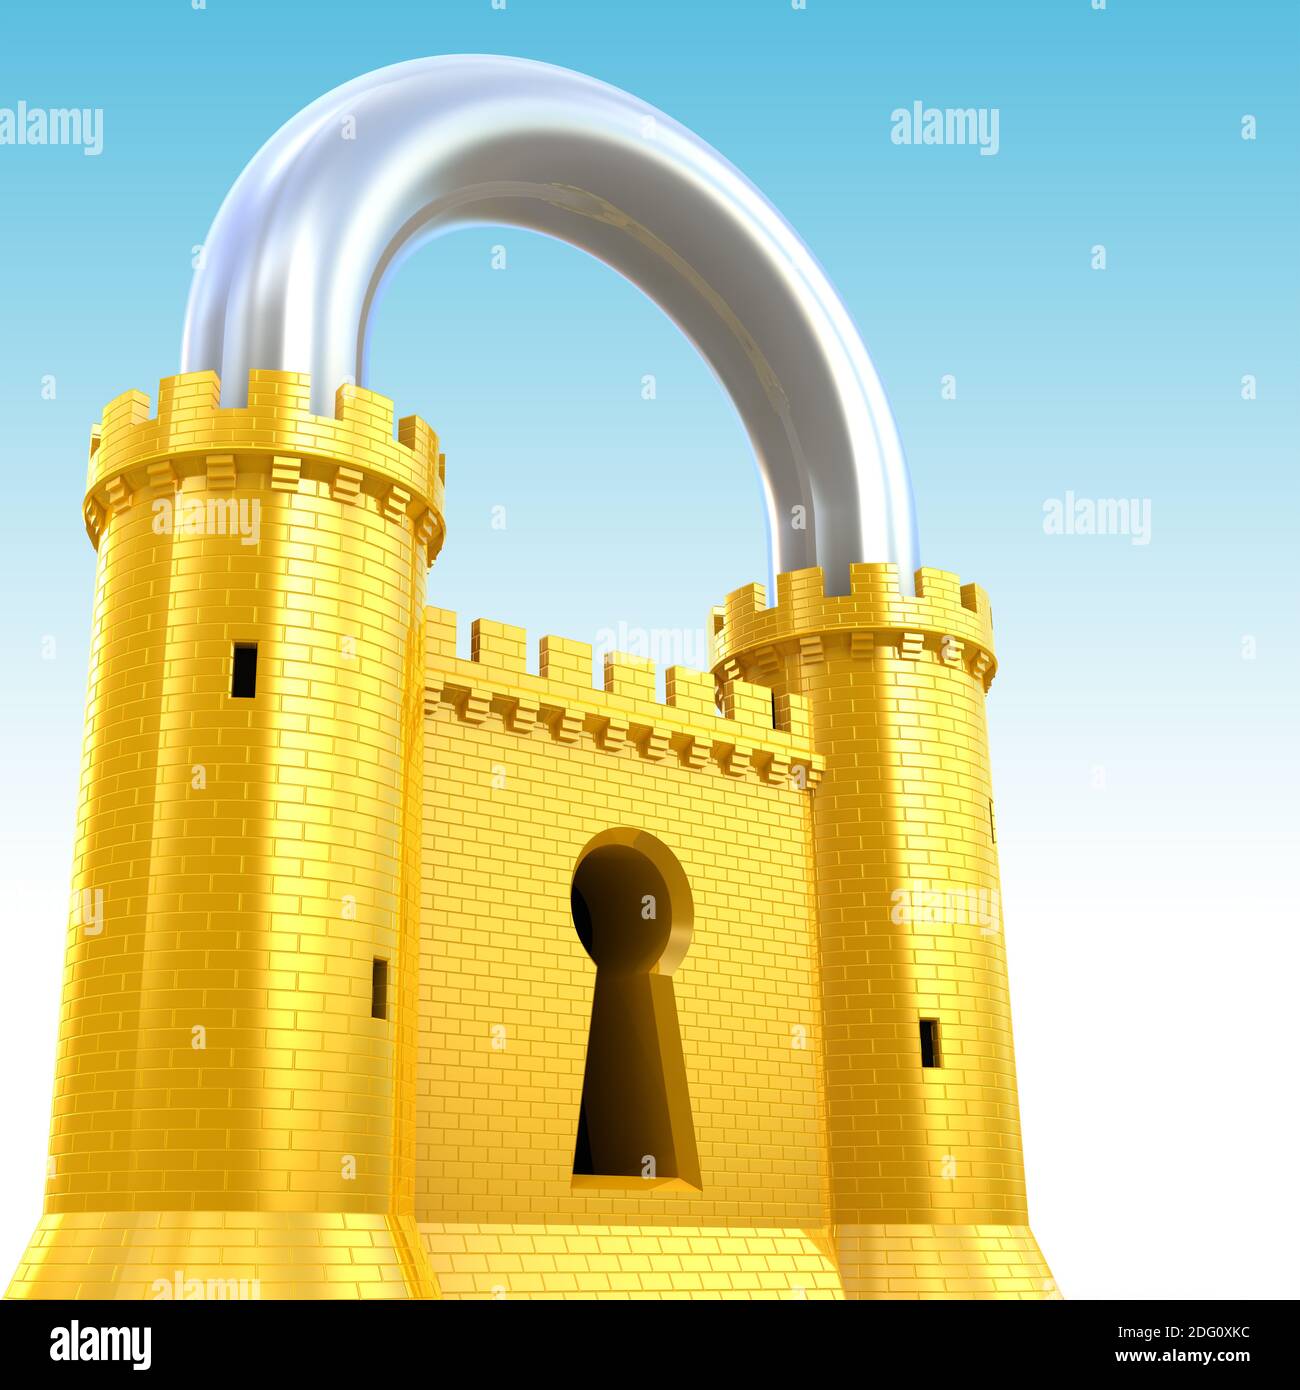 Security concept. Padlock as fortress. Stock Photo